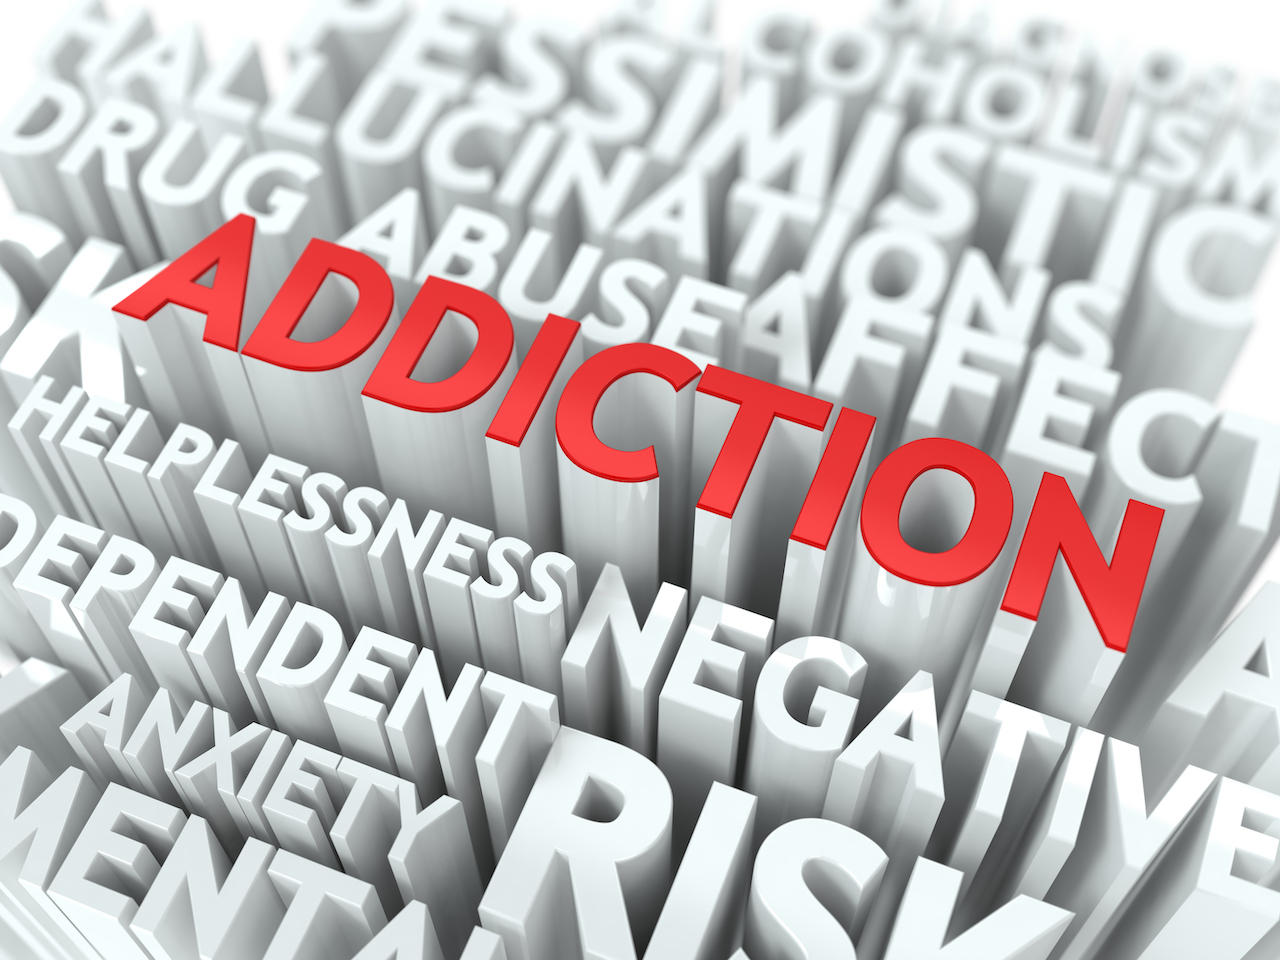 The Addiction Epidemic: The Surgeon General’s Report